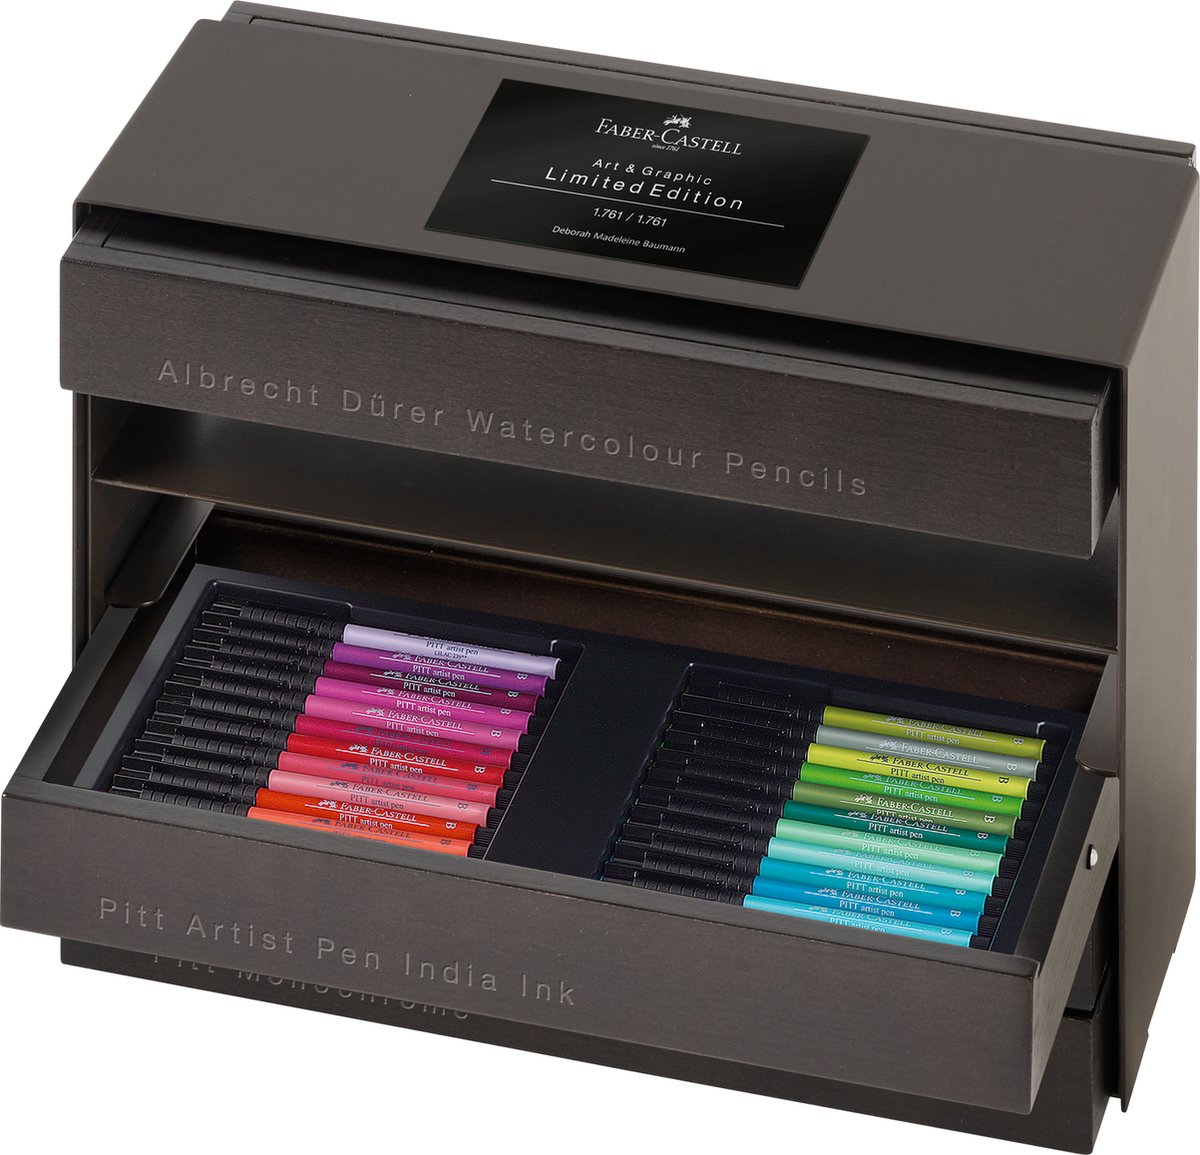 Faber-Castell Art & Graphic – Limited edition – houten kist met lades – FC-110052